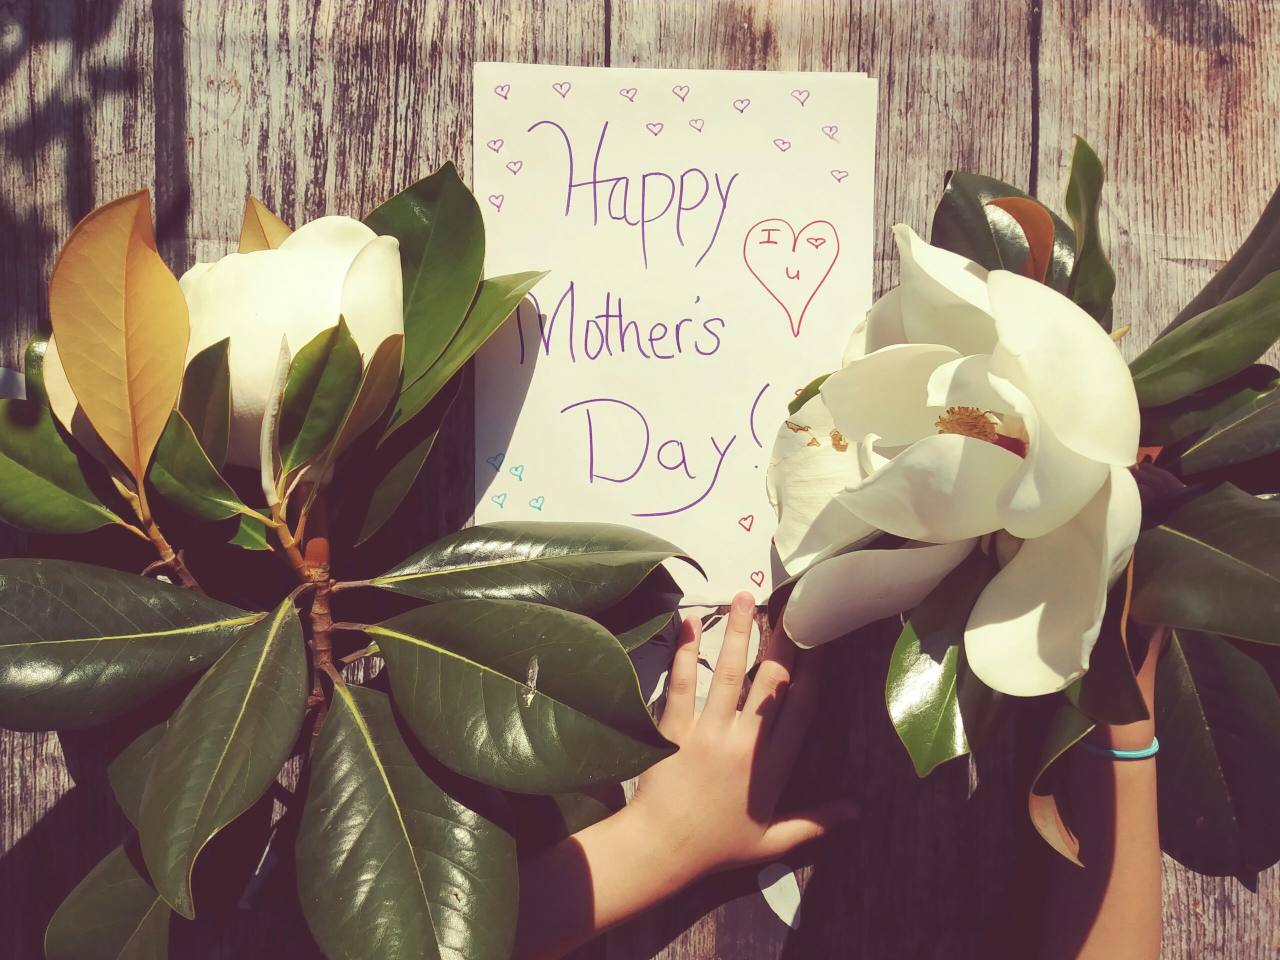 Sign reads Happy Mother's Day surrounded with flowers